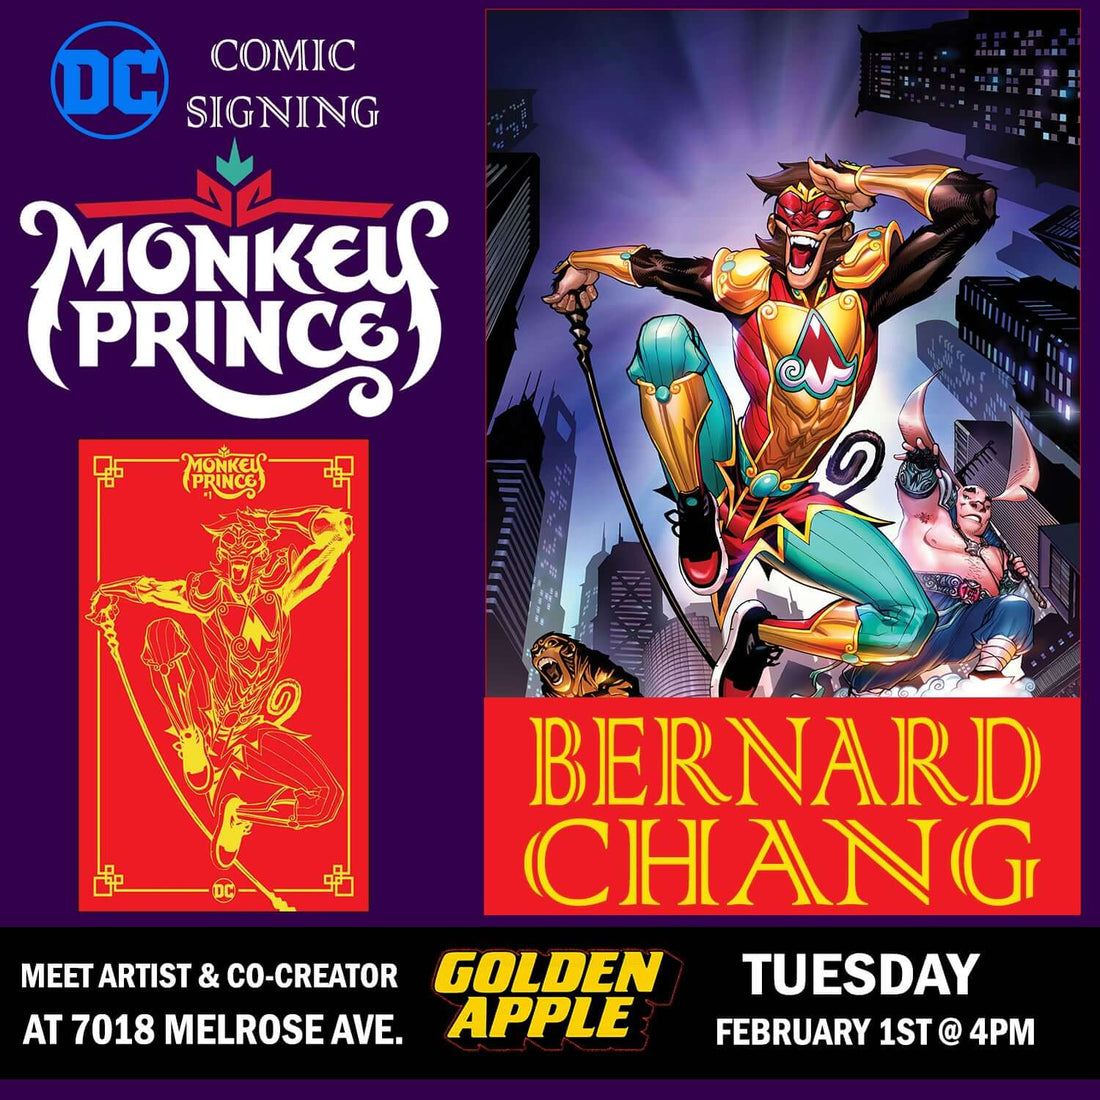 Artist and Co-Creator Bernard Chang To Sign DC Comics New Series Monkey Prince at Golden Apple